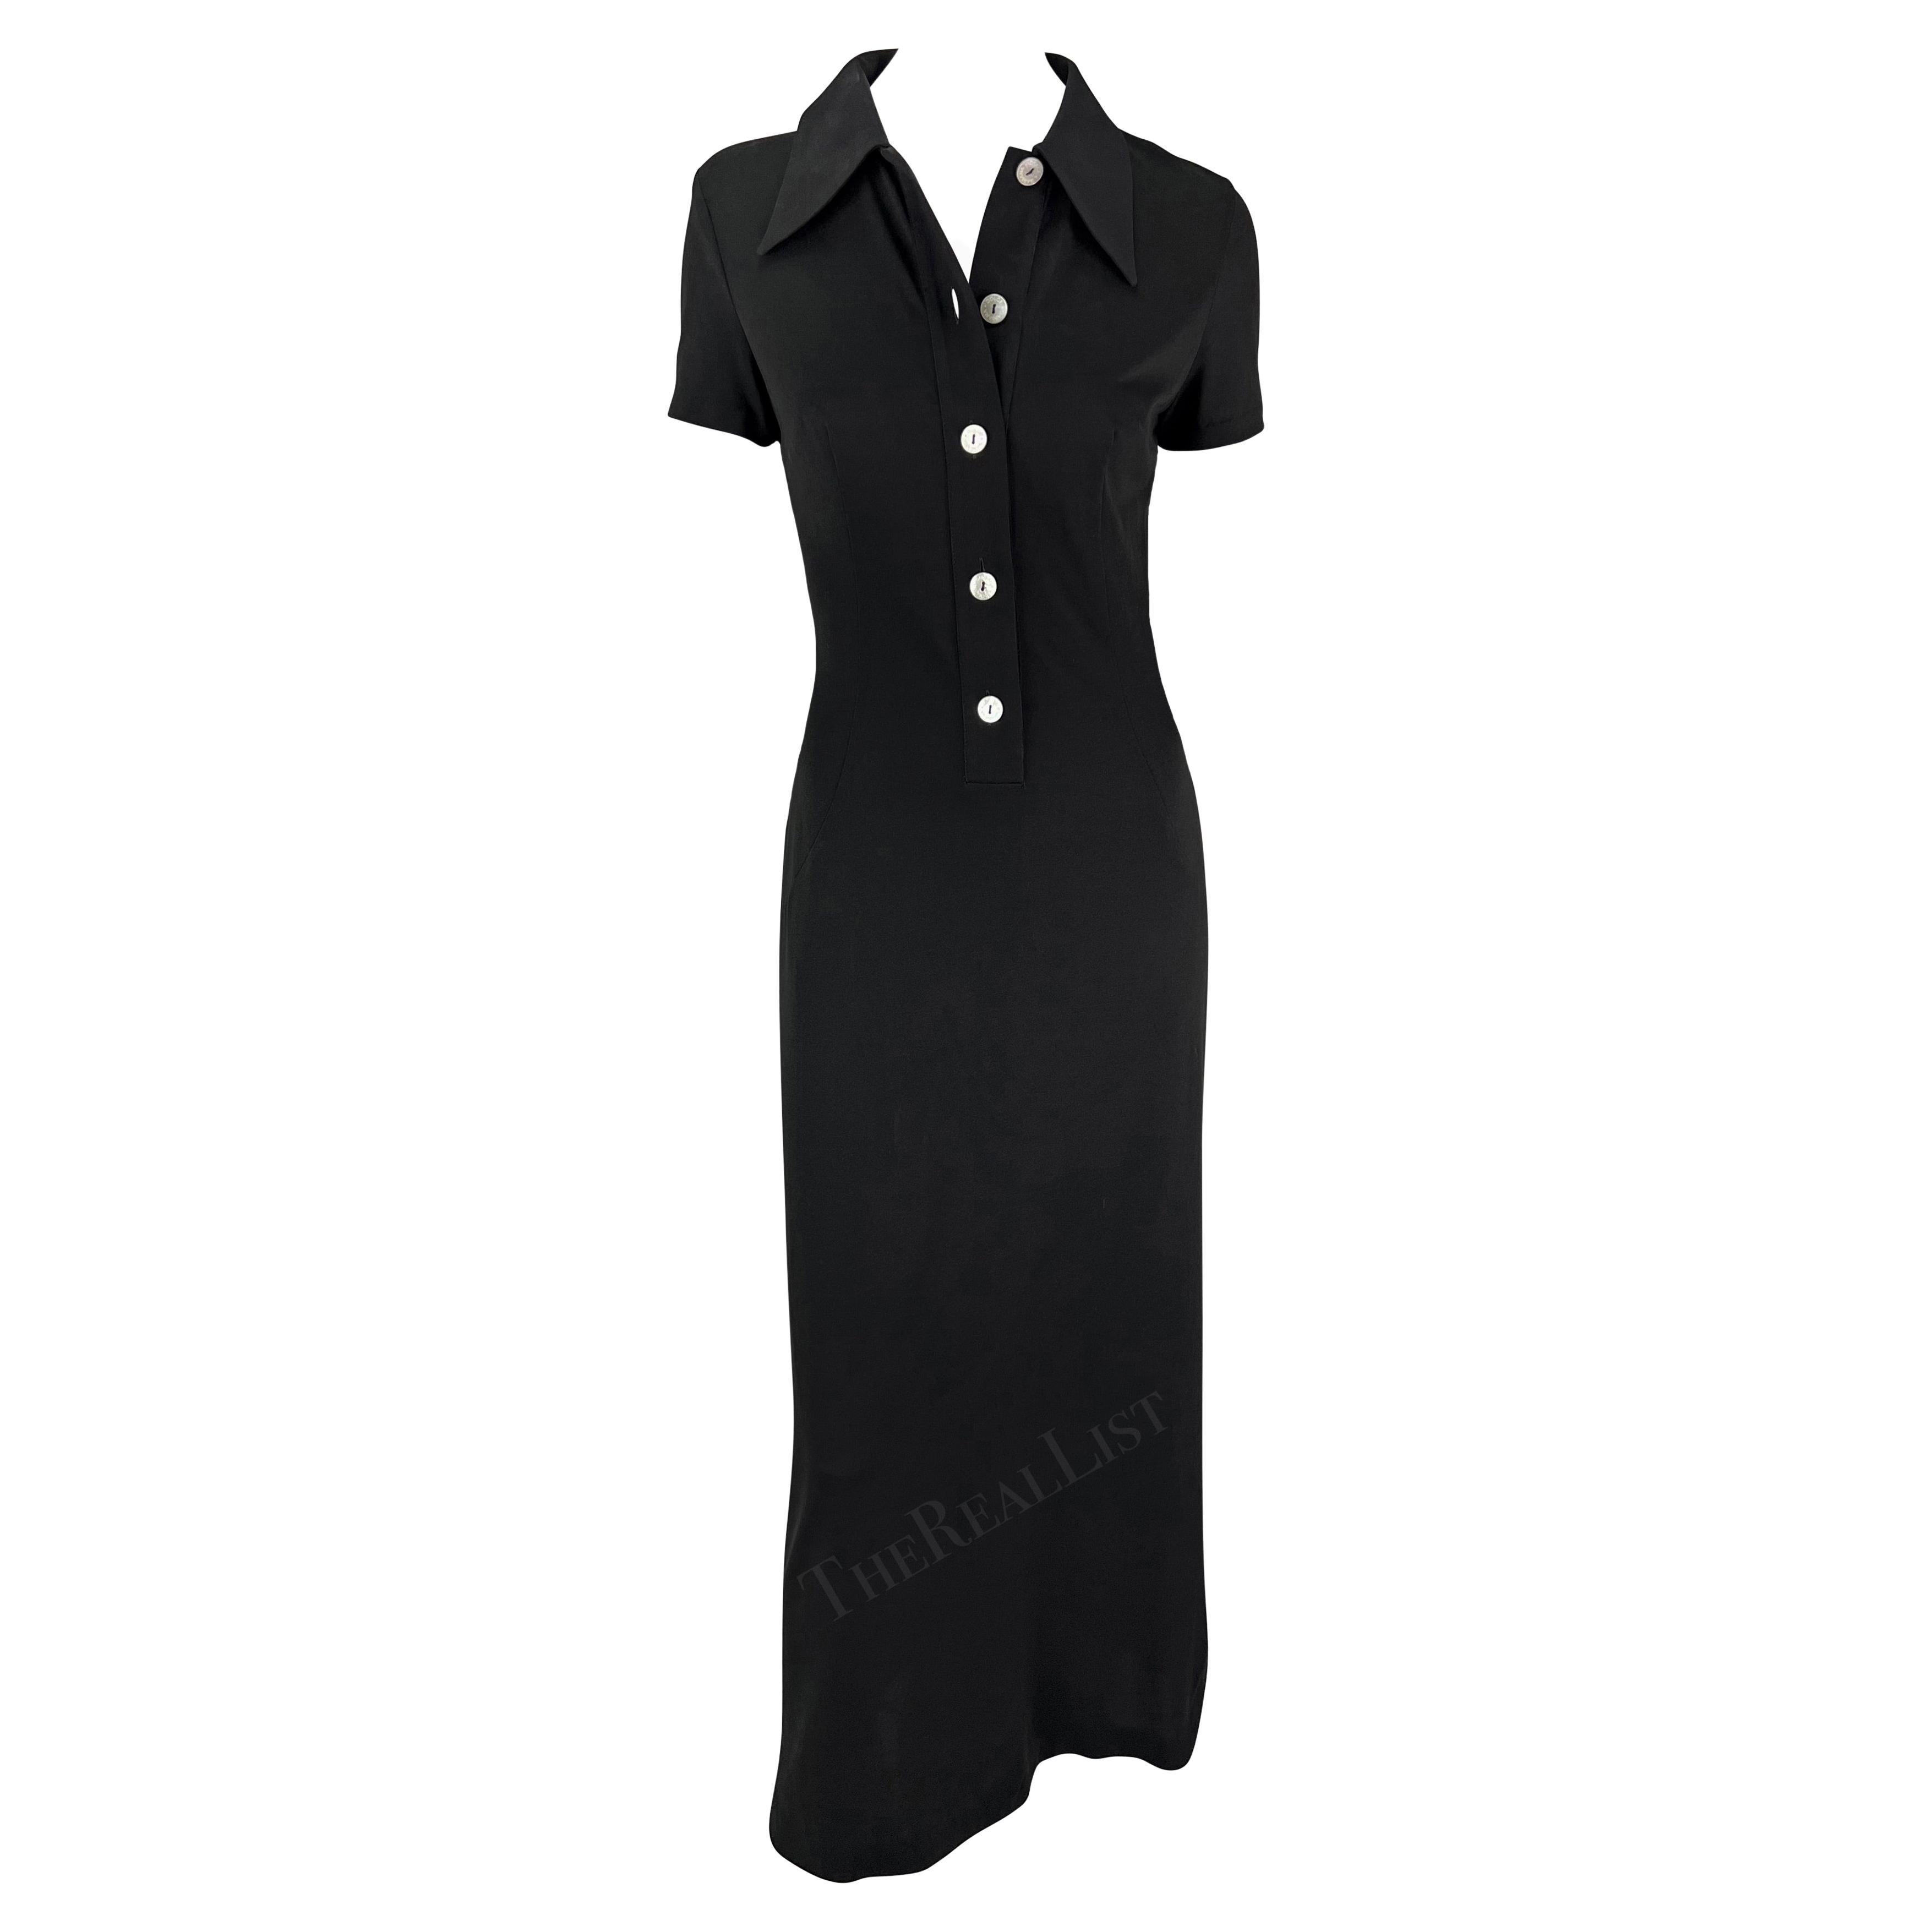 S/S 1996 Dolce & Gabbana Runway Black Collared Plunge Button Maxi Dress For Sale